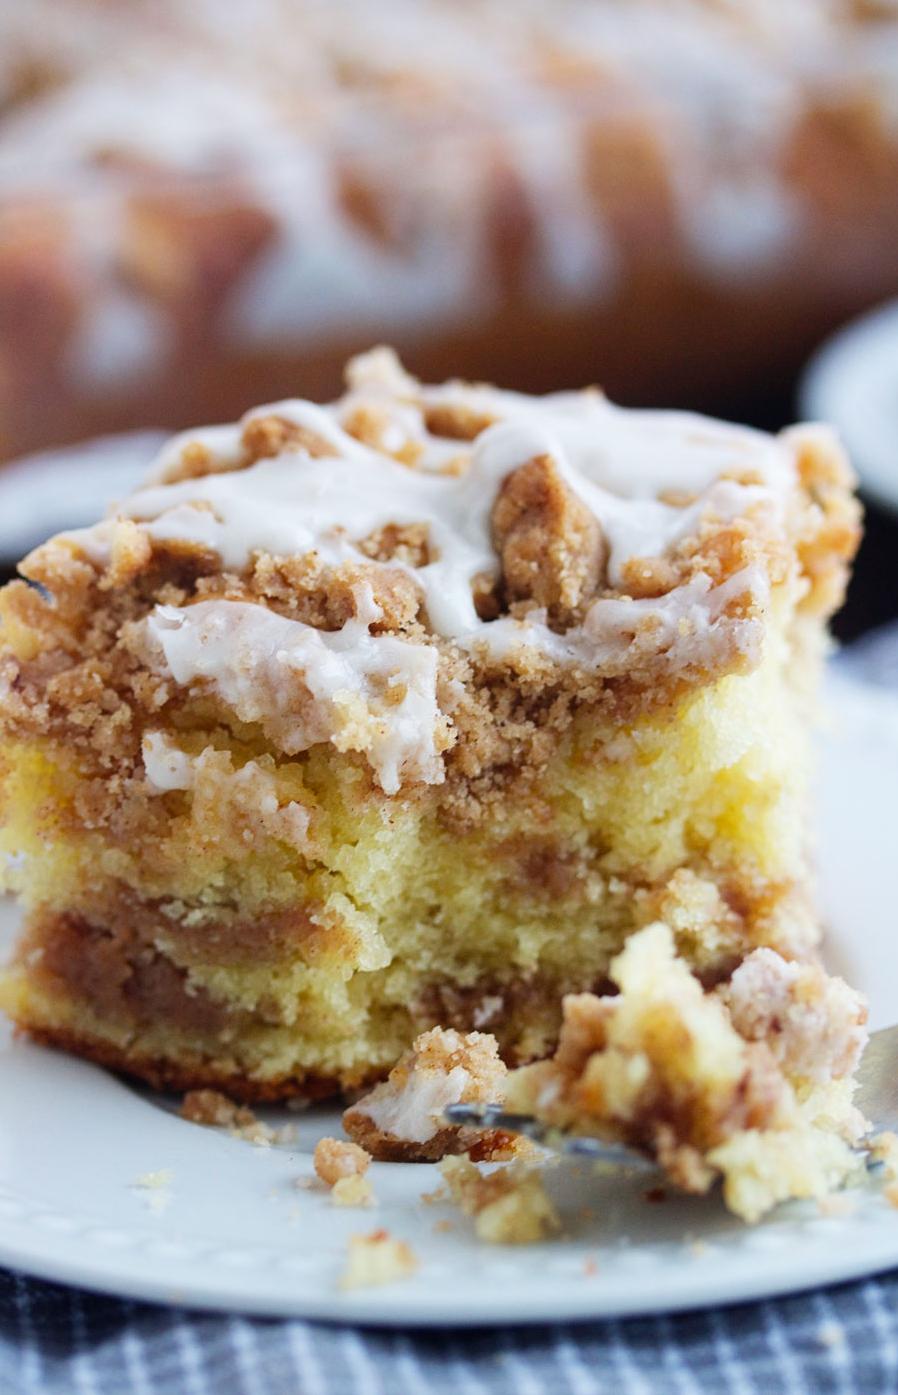  Crispy streusel topping: the ultimate finishing touch.